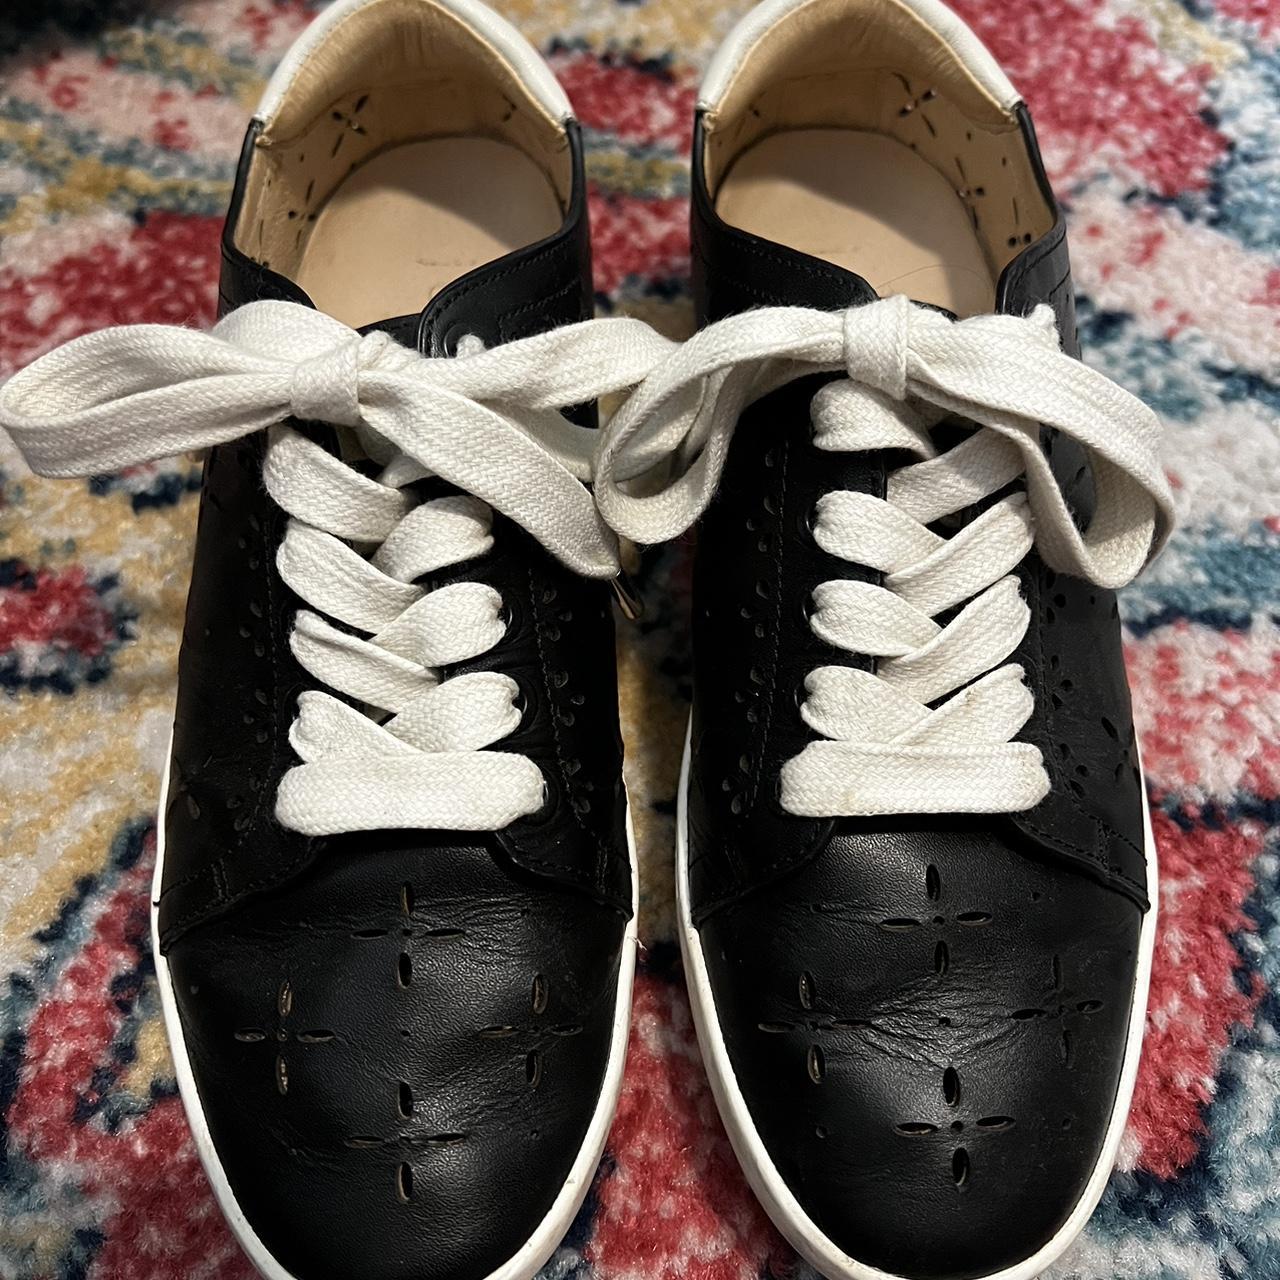 Joie Women's Black and White Trainers